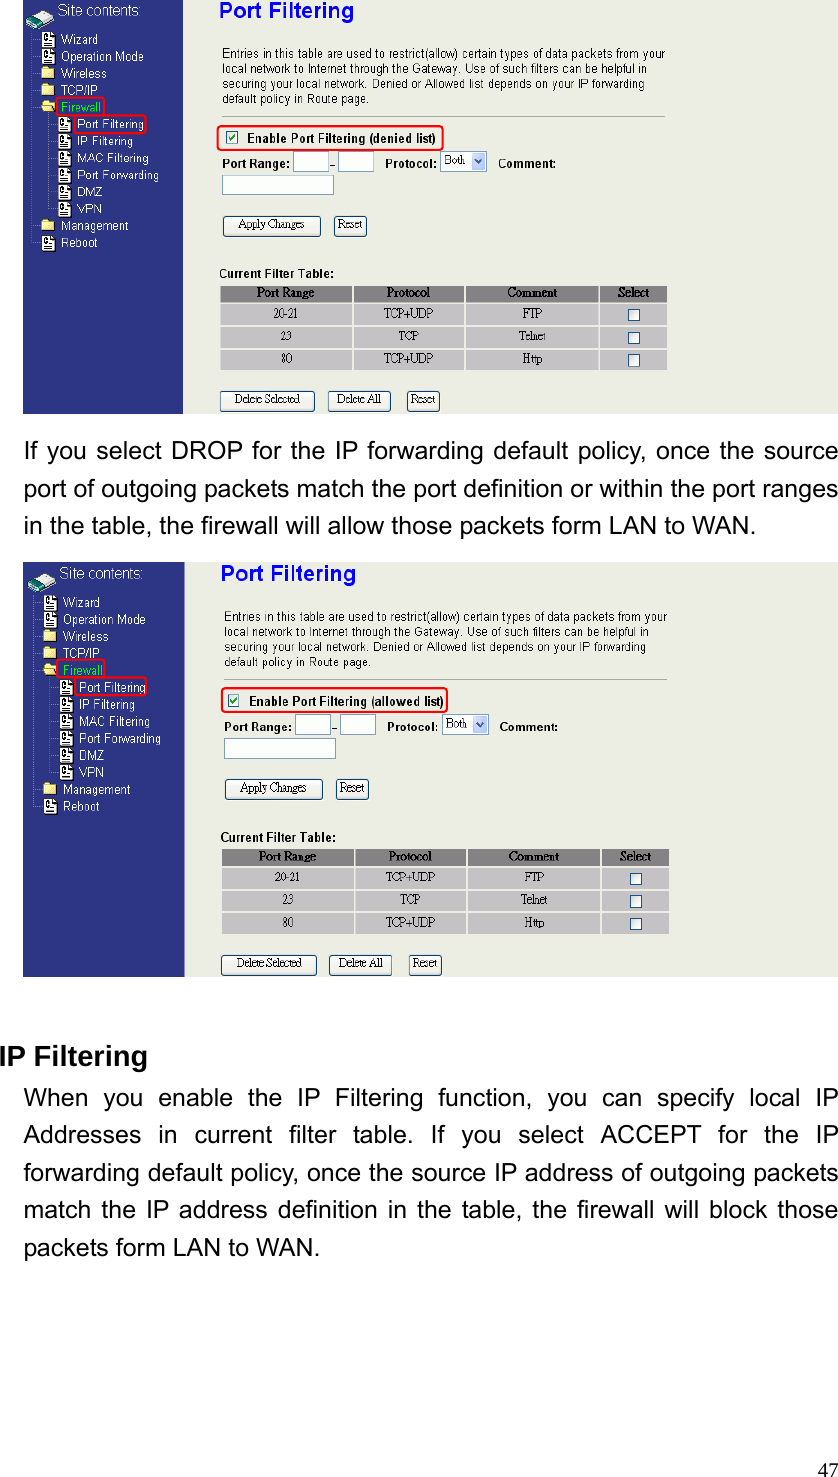  47 If you select DROP for the IP forwarding default policy, once the source port of outgoing packets match the port definition or within the port ranges in the table, the firewall will allow those packets form LAN to WAN.   IP Filtering When you enable the IP Filtering function, you can specify local IP Addresses in current filter table. If you select ACCEPT for the IP forwarding default policy, once the source IP address of outgoing packets match the IP address definition in the table, the firewall will block those packets form LAN to WAN. 